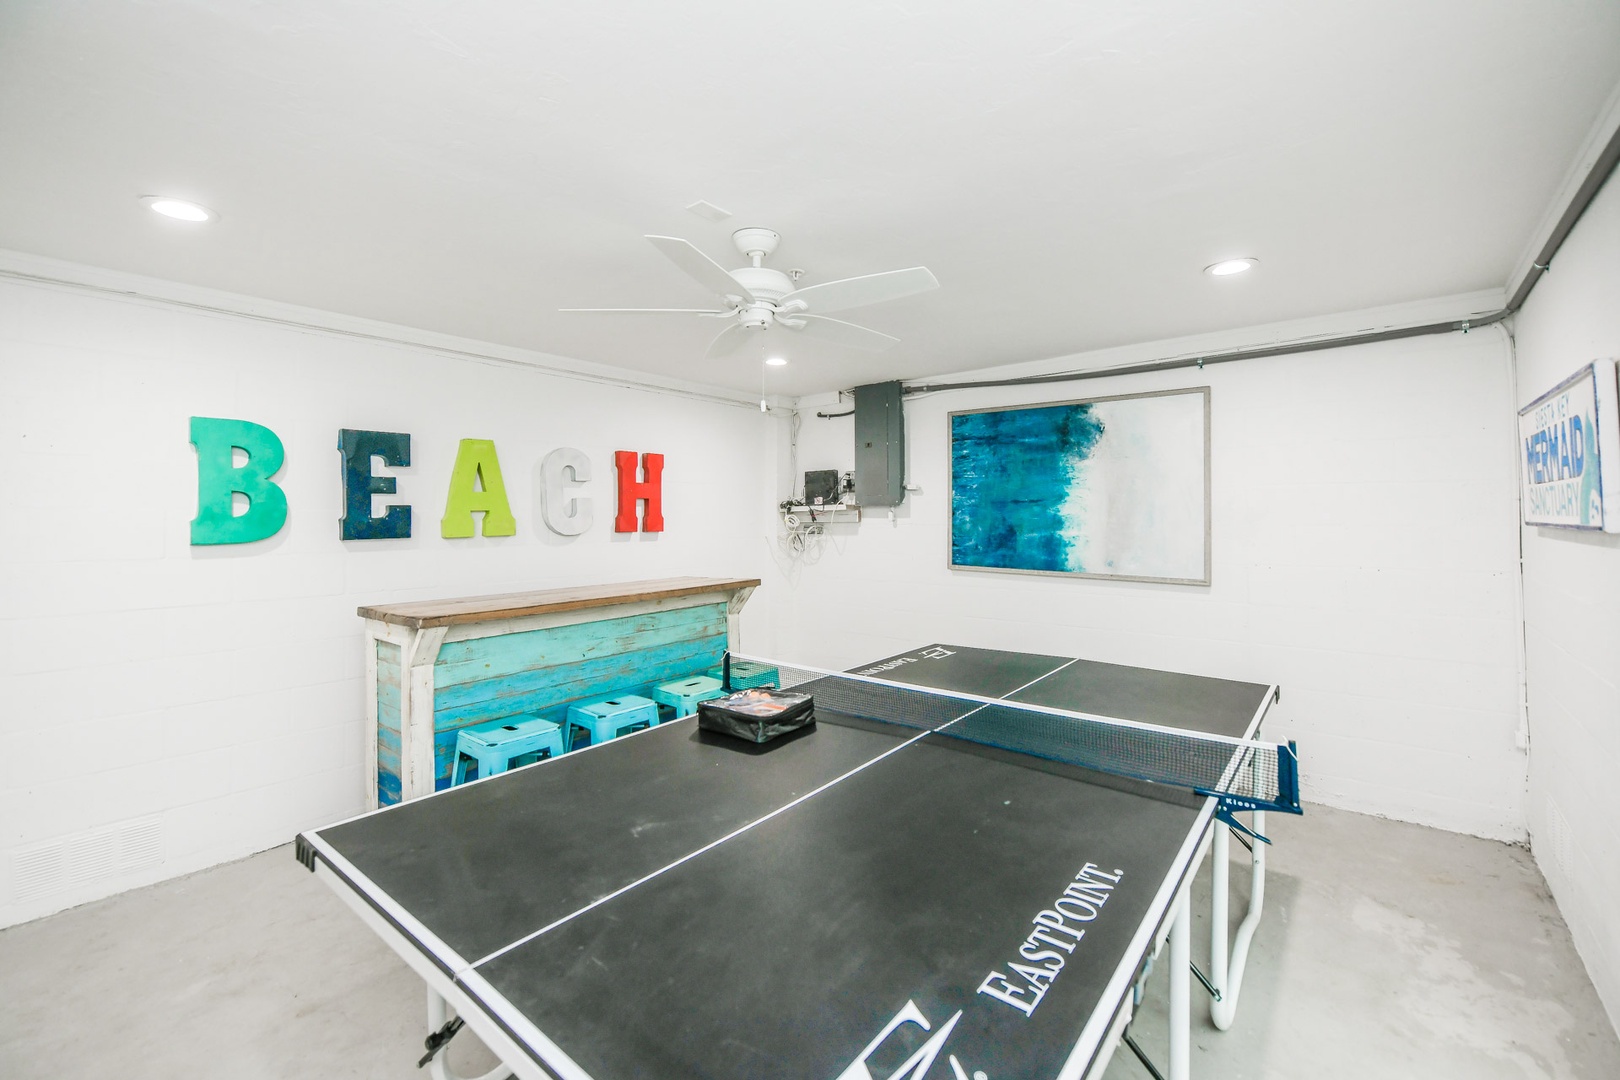 Game Room - Ping Pong and Foosball